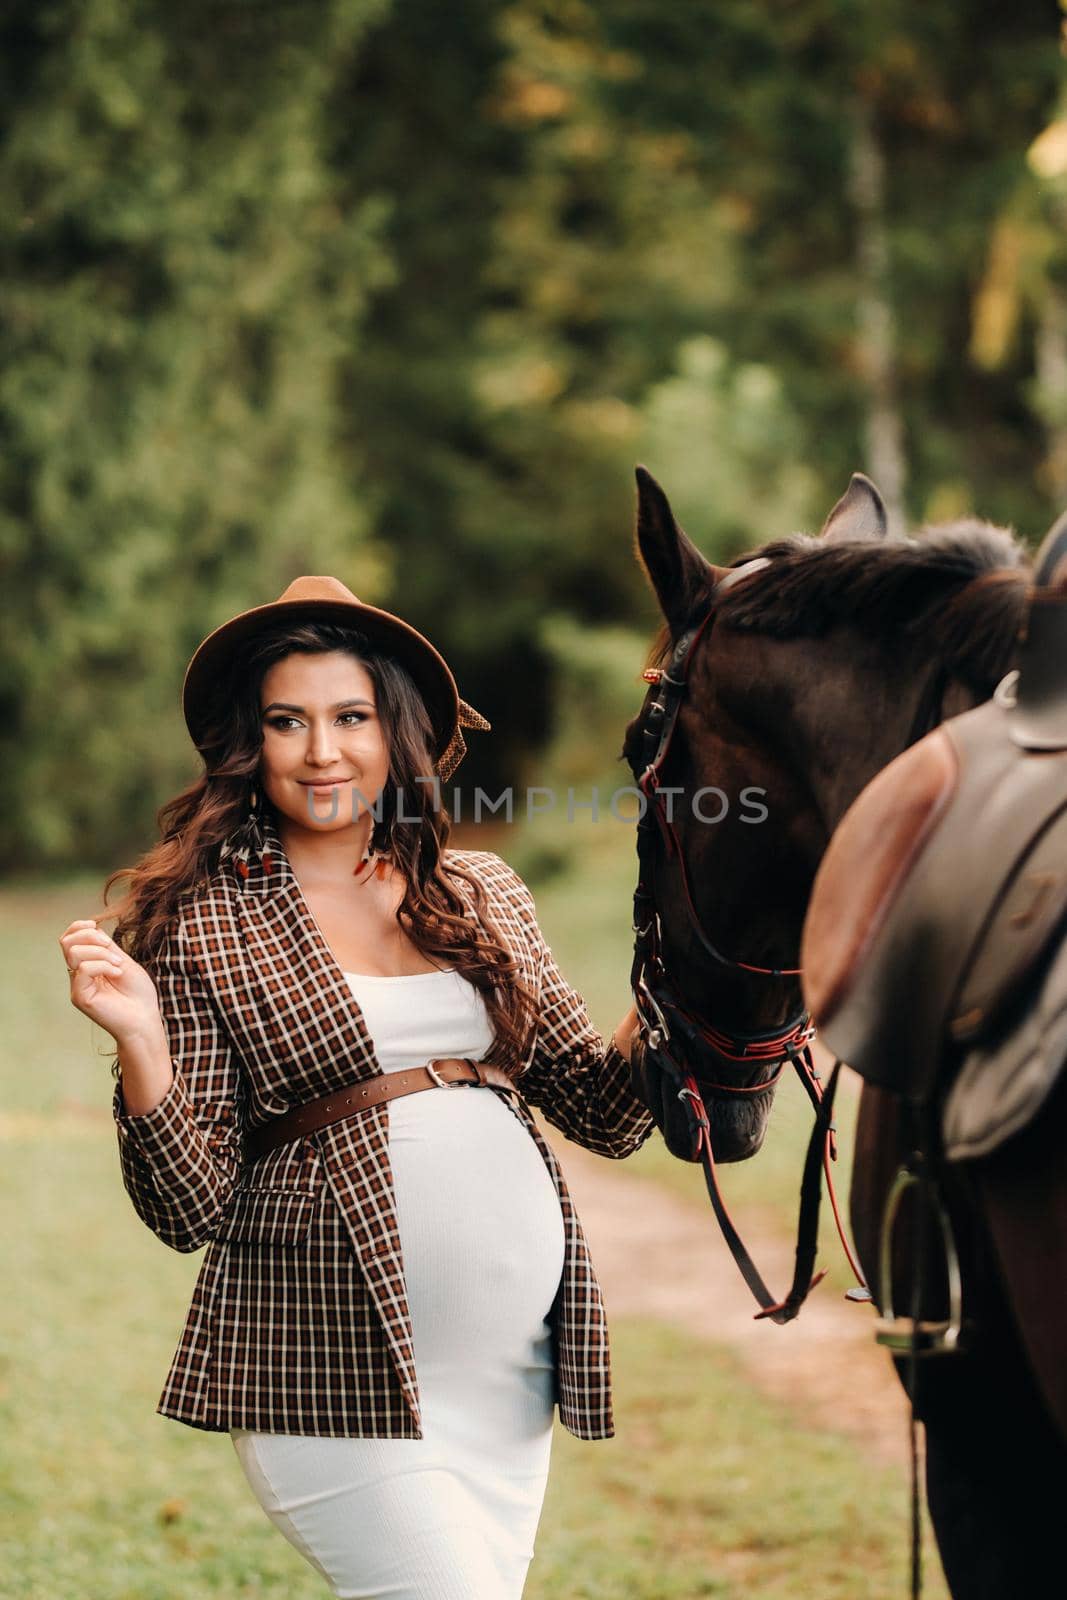 pregnant girl with a big belly in a hat next to horses in the forest in nature.A stylish pregnant woman in a white dress and brown jacket with horses